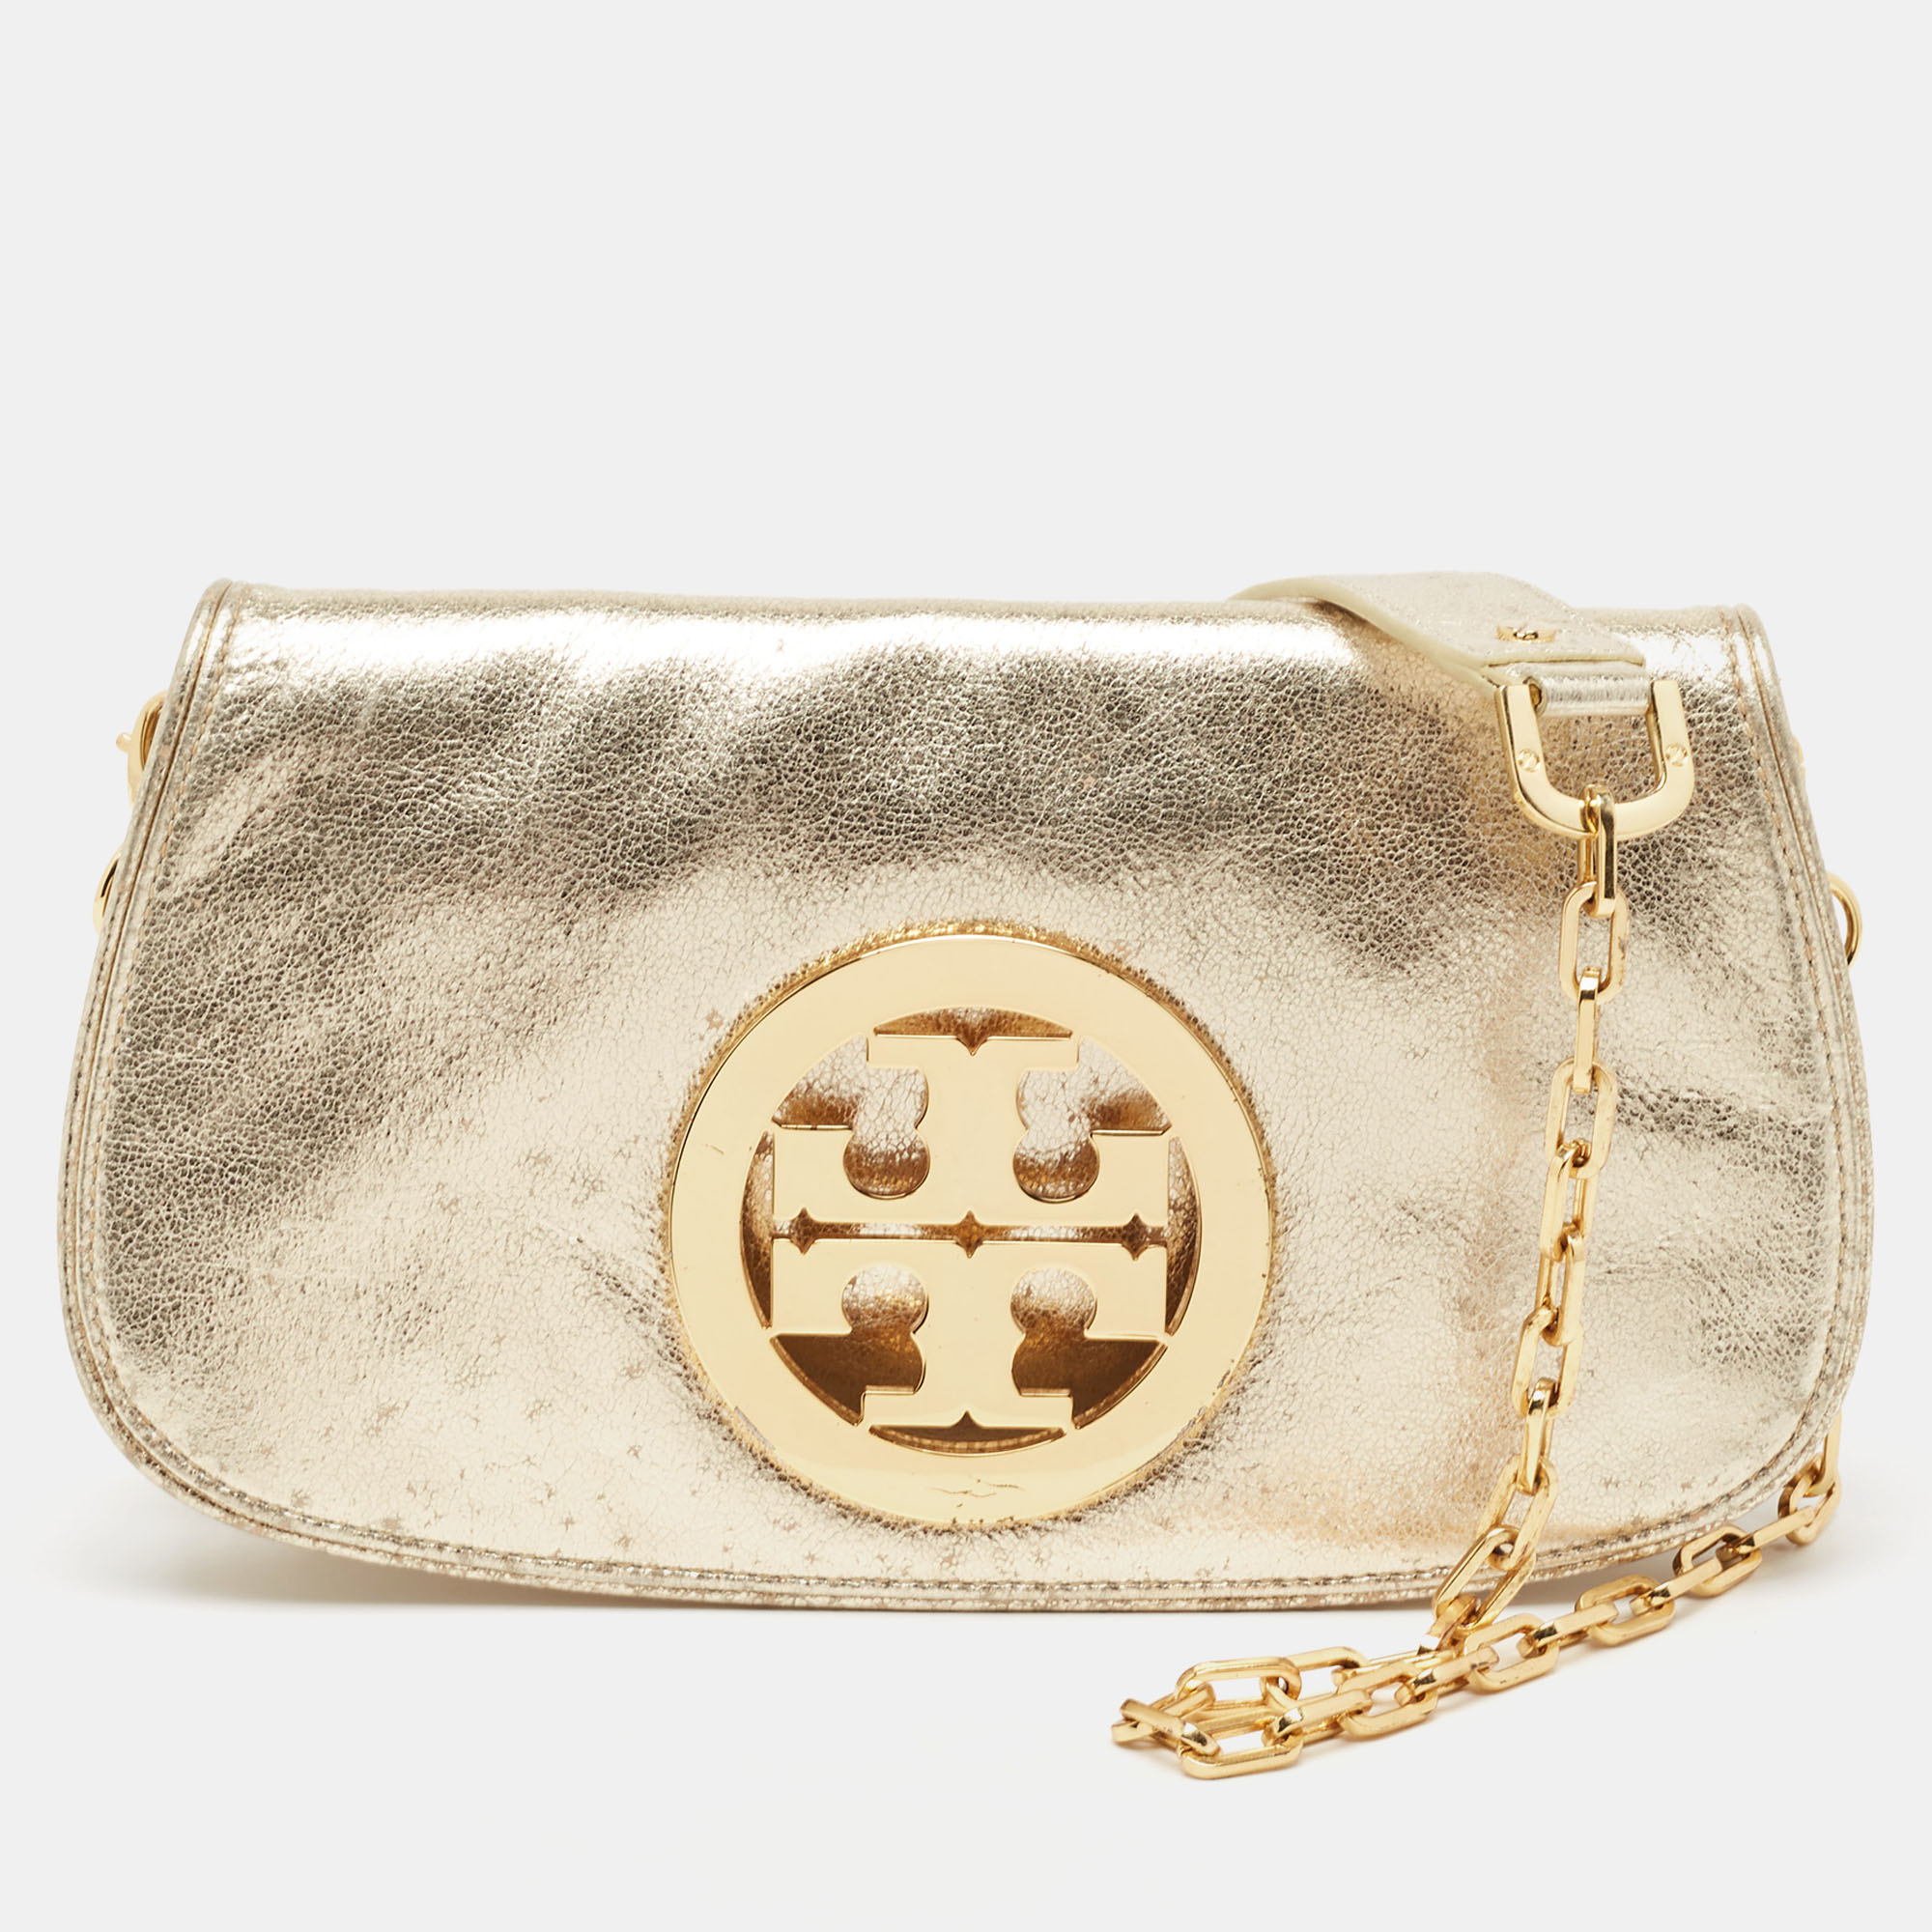 Buy [Used] TORY BURCH Robinson Shoulder Bag Leather Black 39009 from Japan  - Buy authentic Plus exclusive items from Japan | ZenPlus